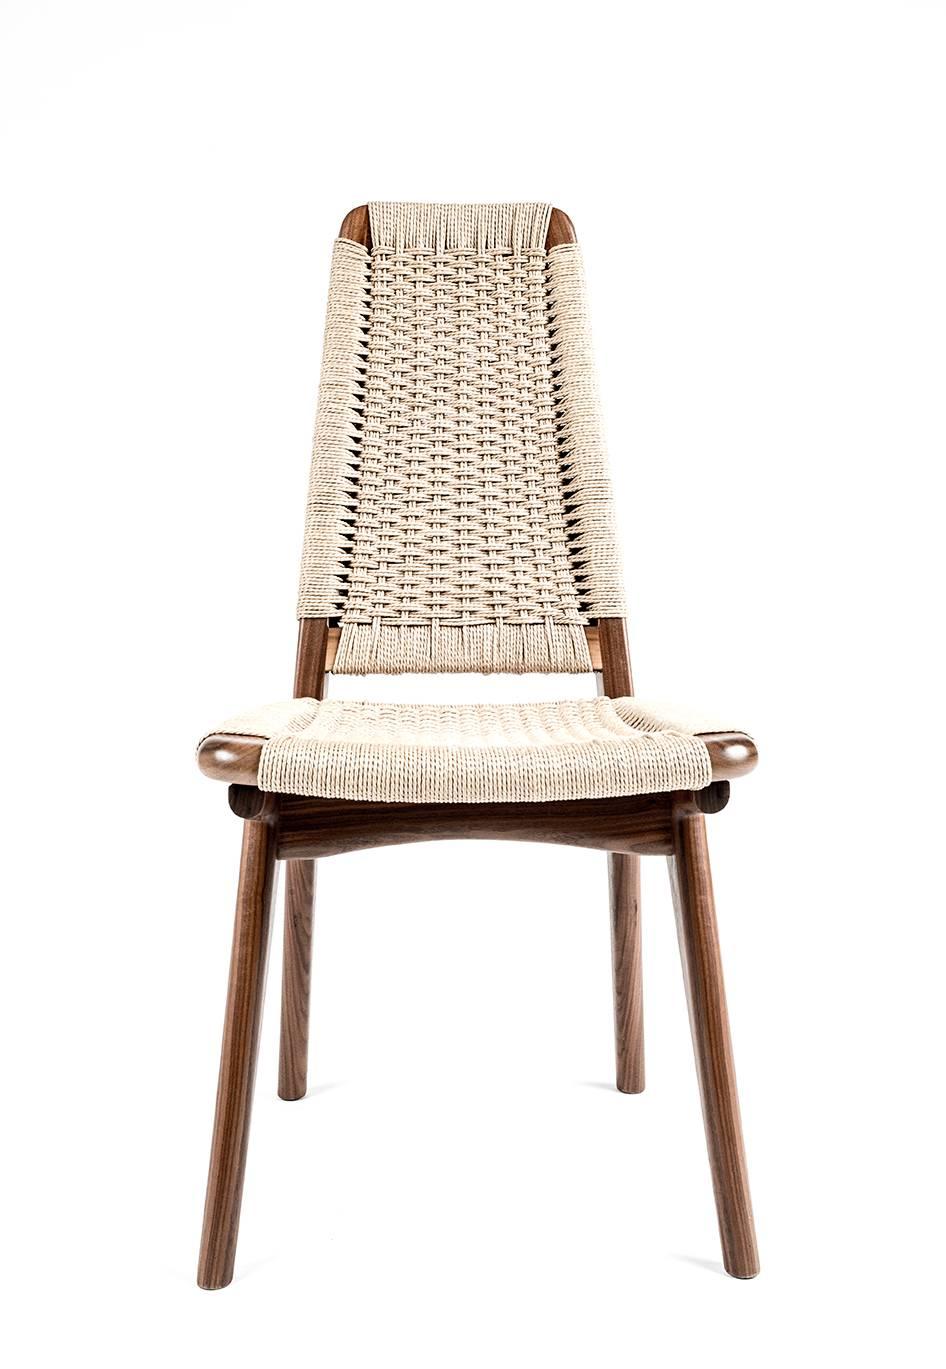 Mid century inspired, hardwood and Danish weave dining or office chair. Can be made with any domestic or exotic hardwood of your choosing. Taking Rian to new heights. All the beauty and sophistication of our Rian collection realized in a new high